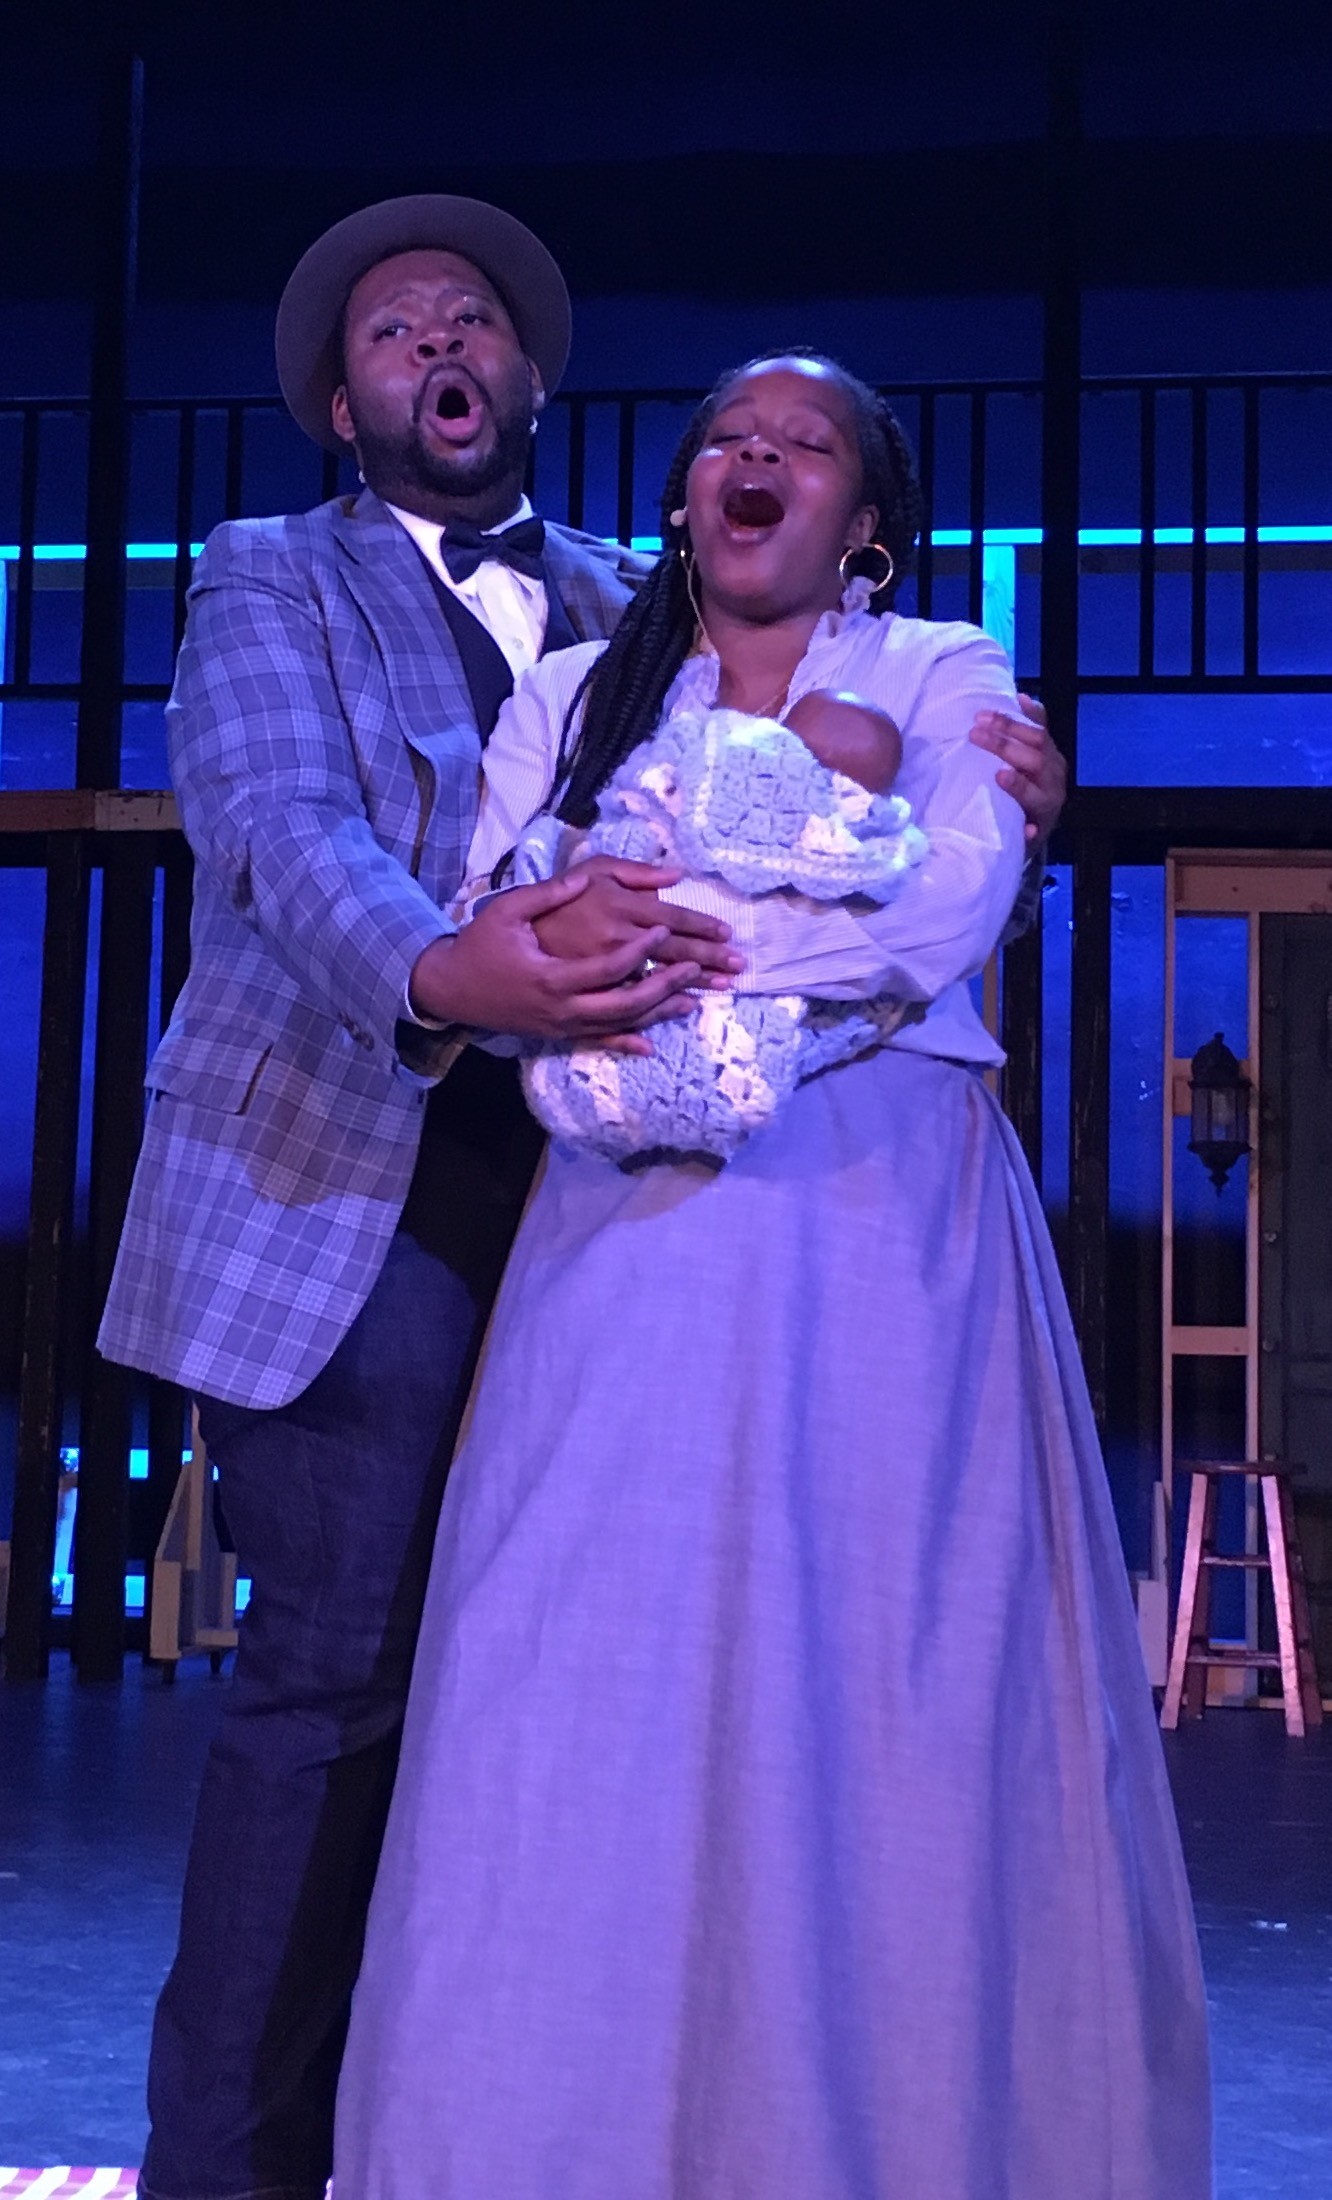 Step back into the early 20th century in BroadHollow Theatre Company's staging of "Ragtime" at its venue in Elmont, Friday through Sunday.